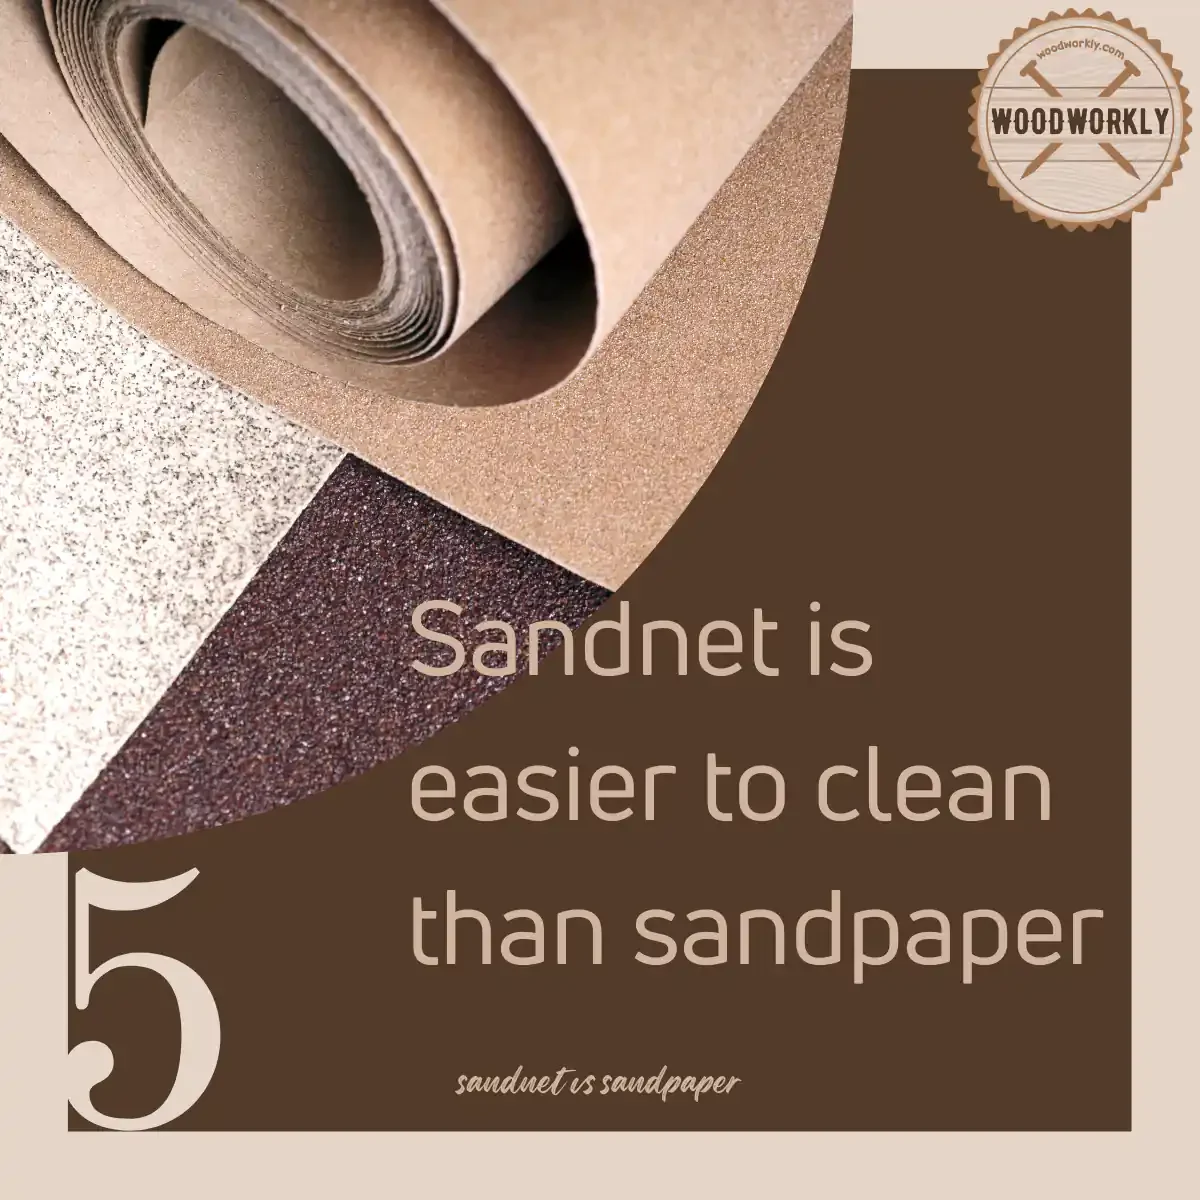 Sandnet is easier to clean by shaking, vacuuming, and rinsing